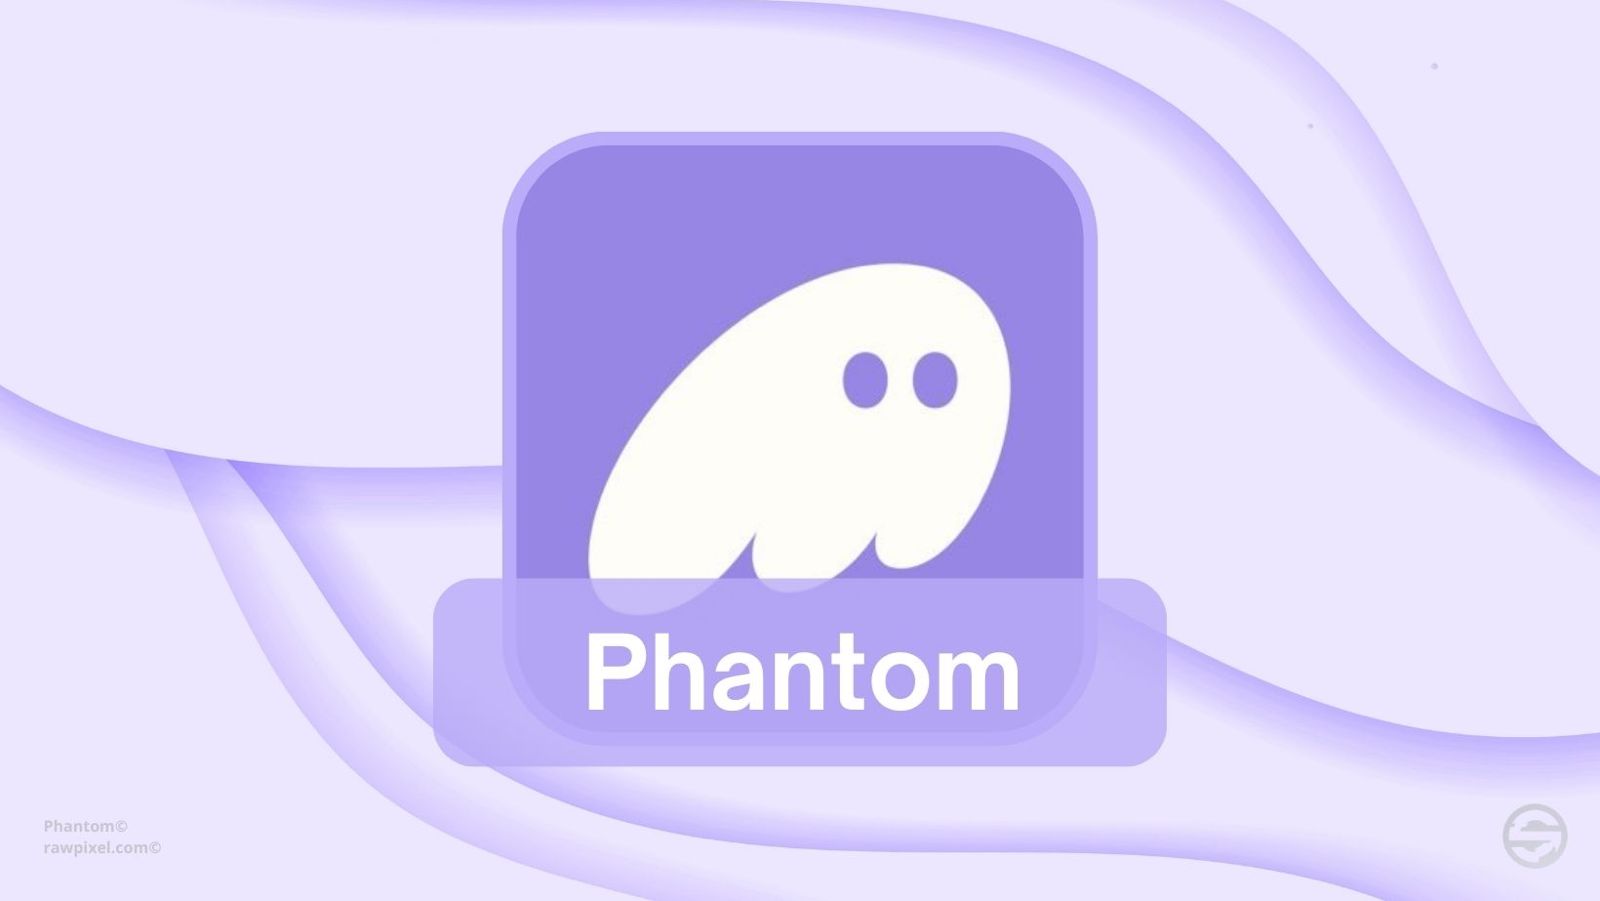 How to create and use a Phantom wallet